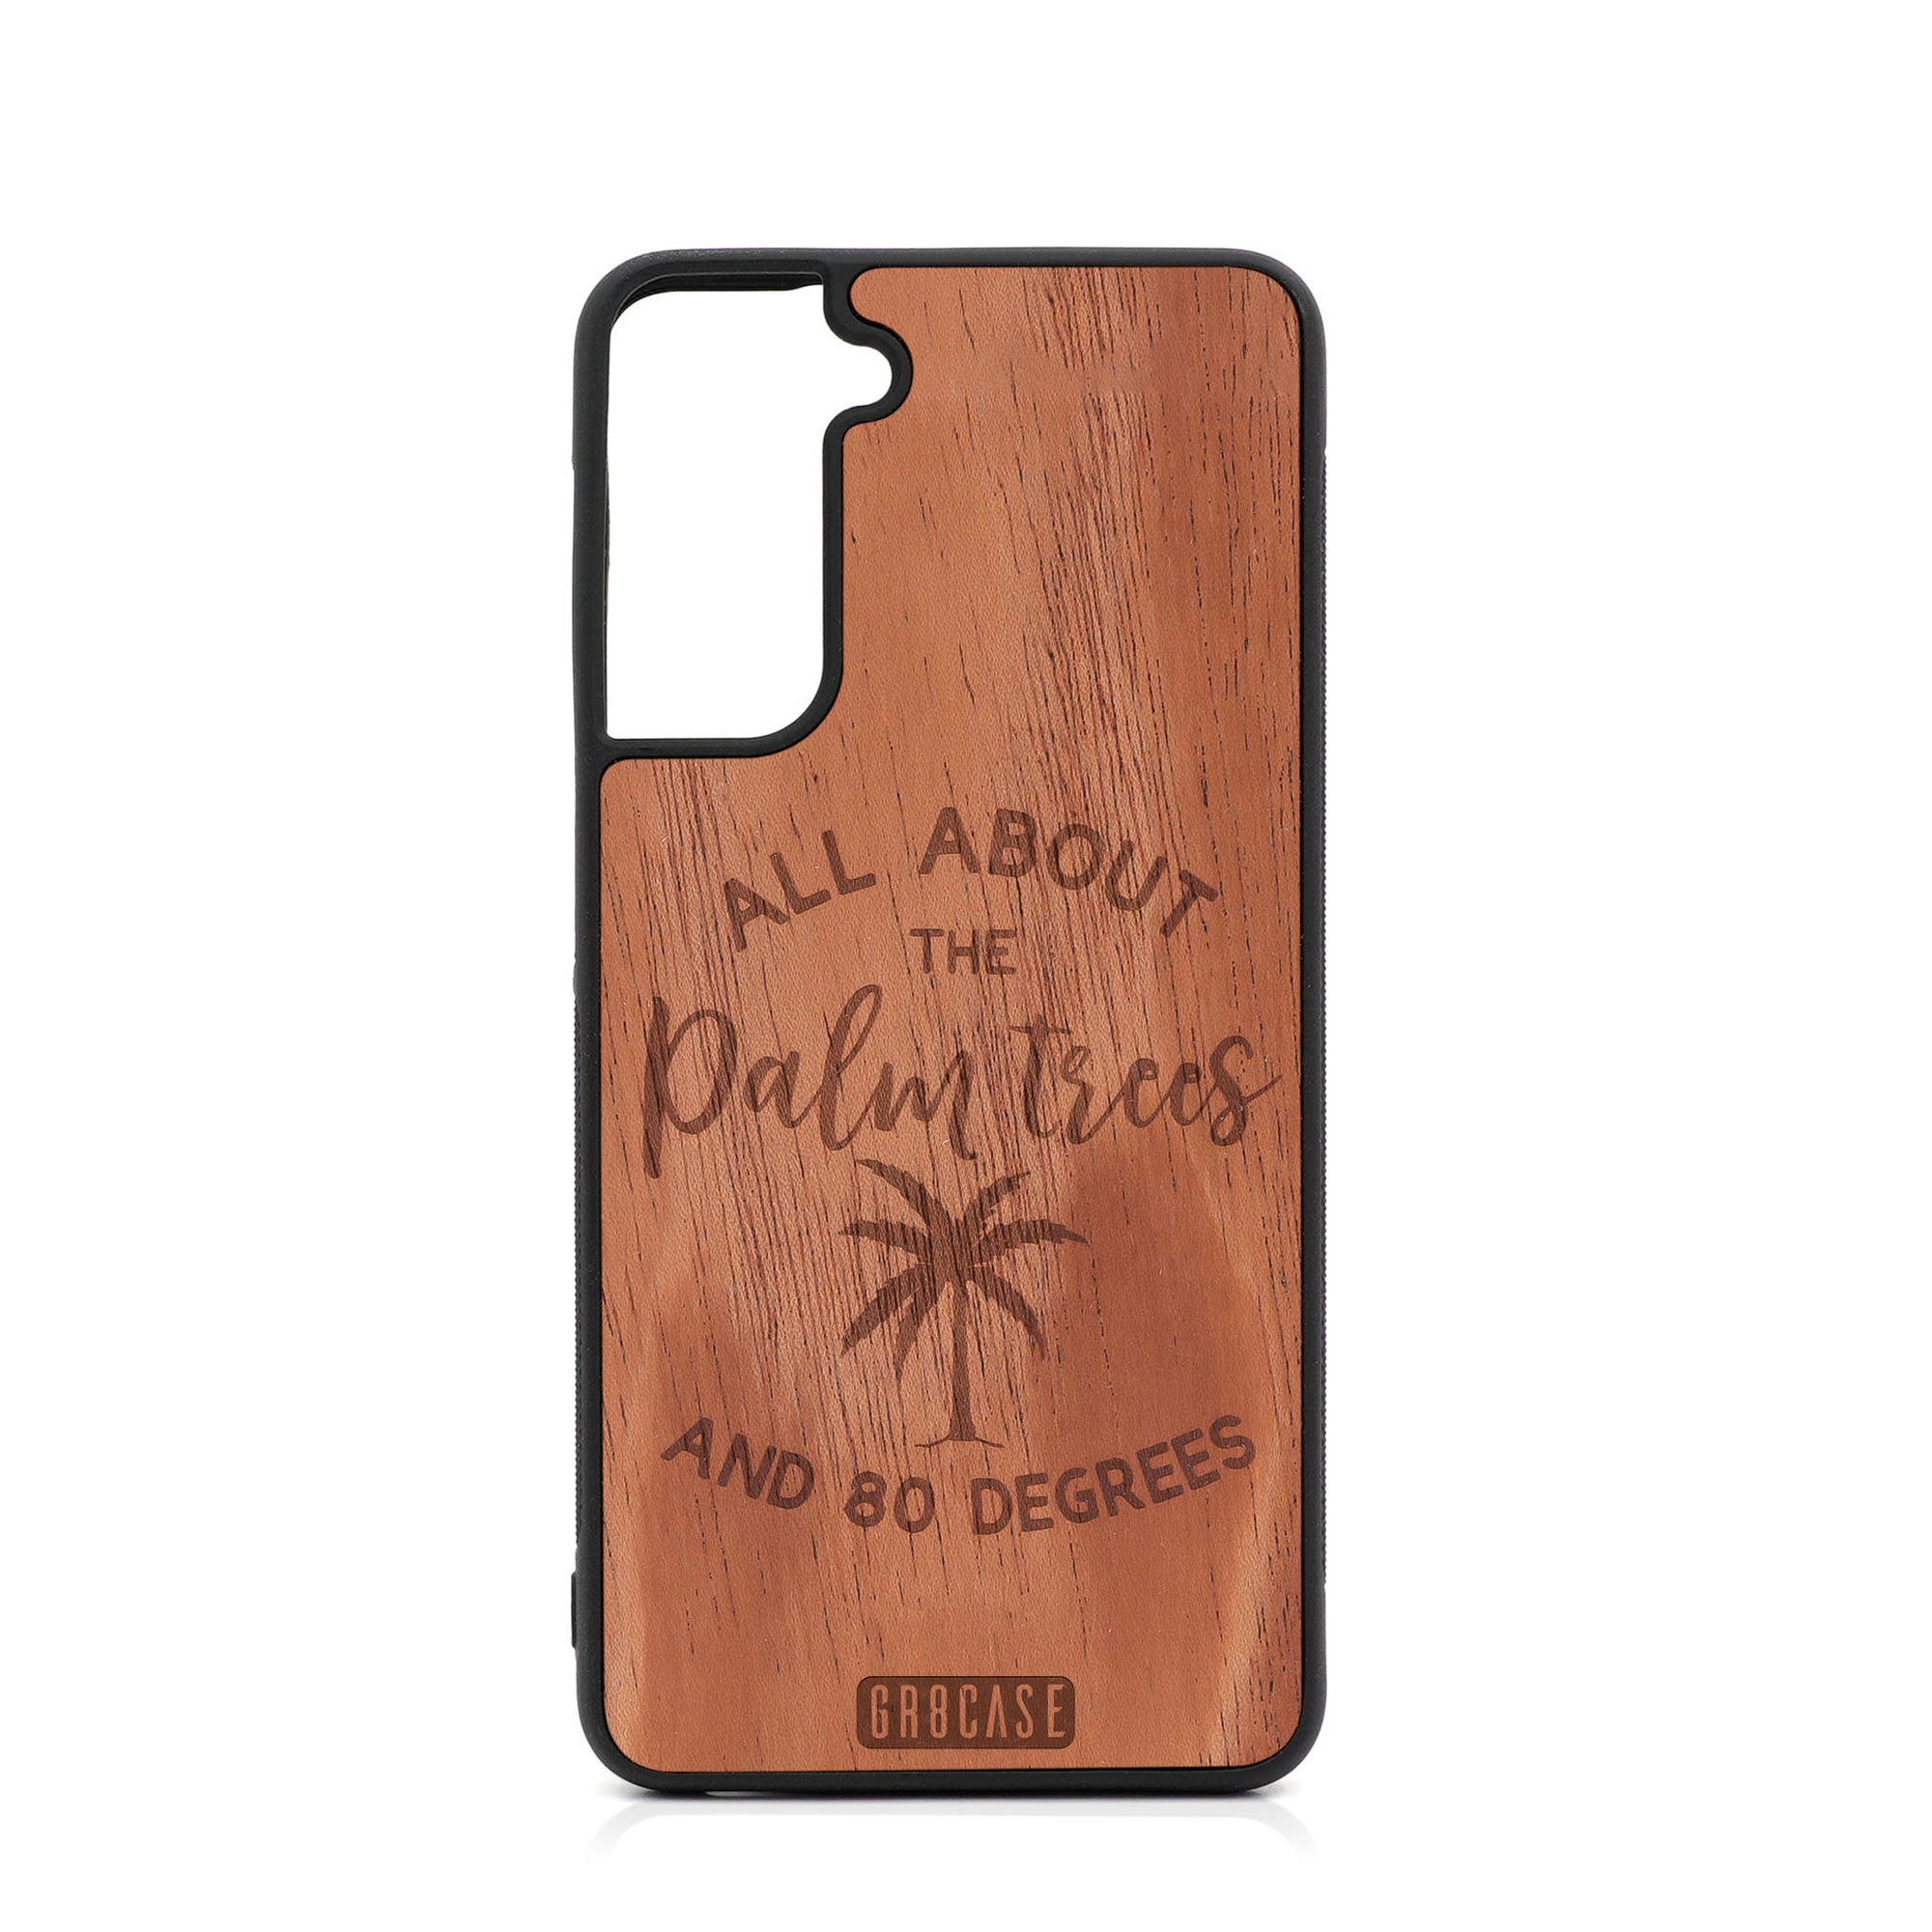 All About The Palm Trees And 80 Degree Design Wood Case For Samsung Galaxy S21 5G